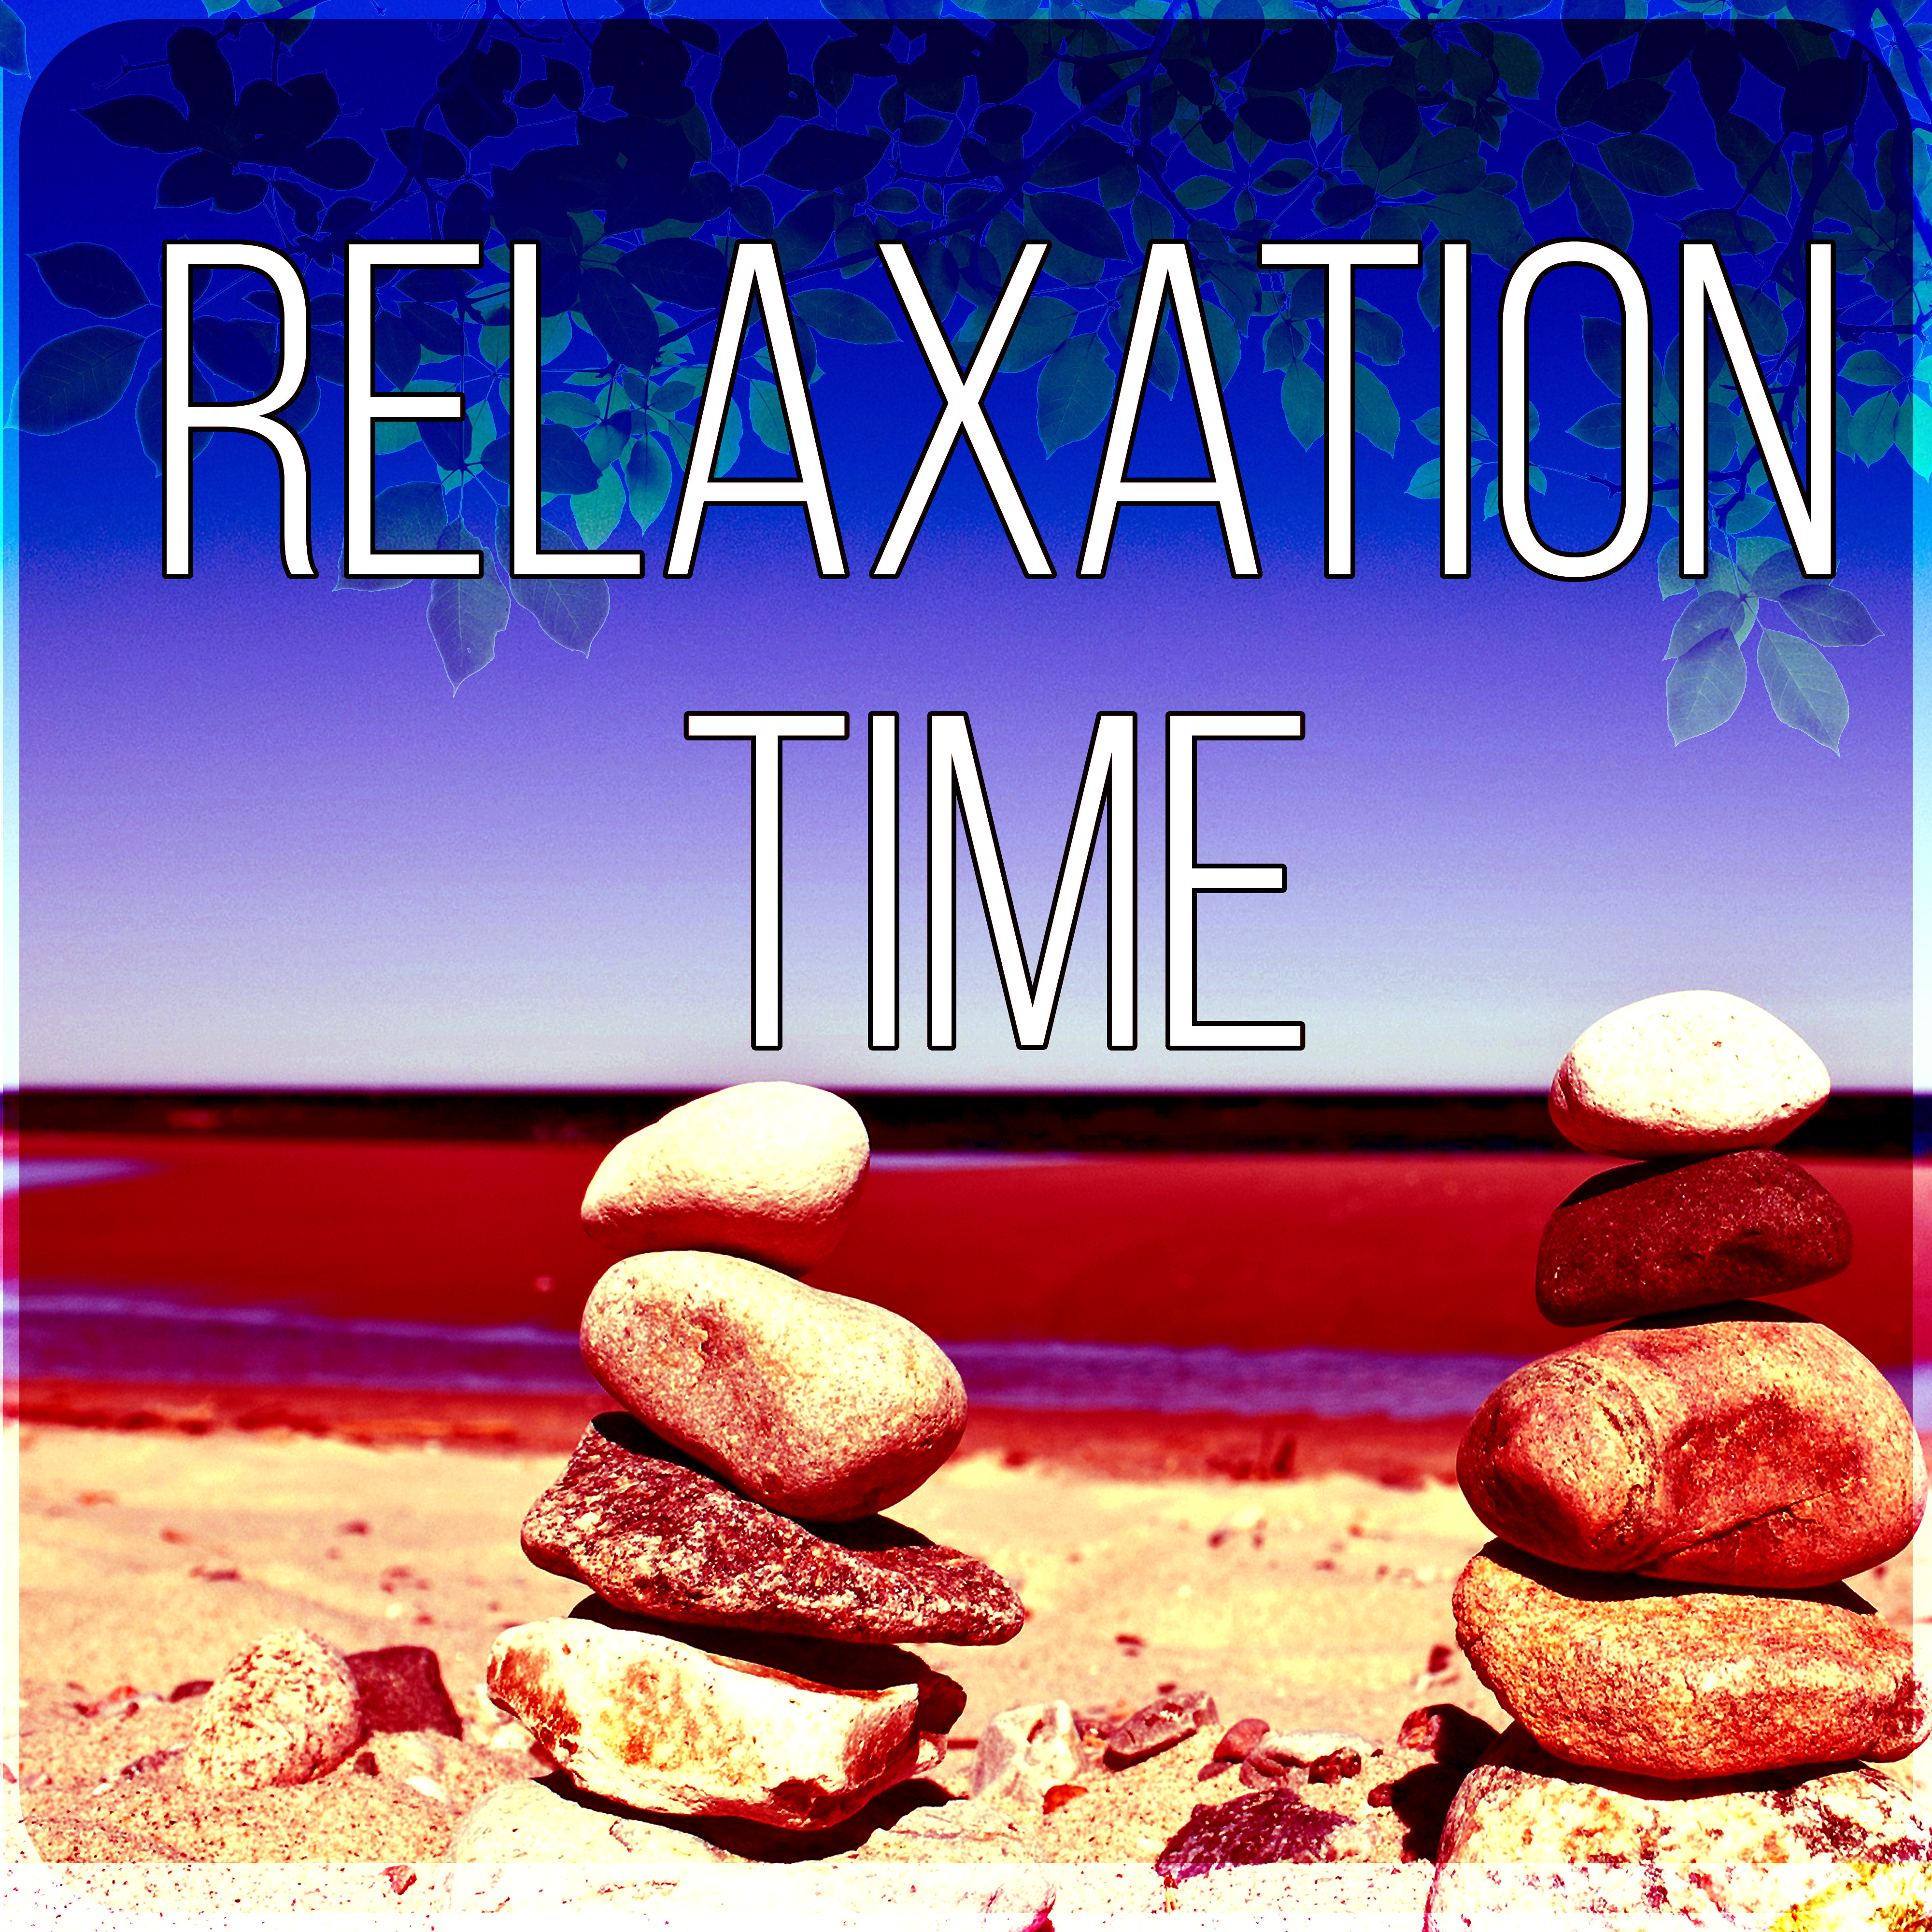 Just Relax (Smooth Music)